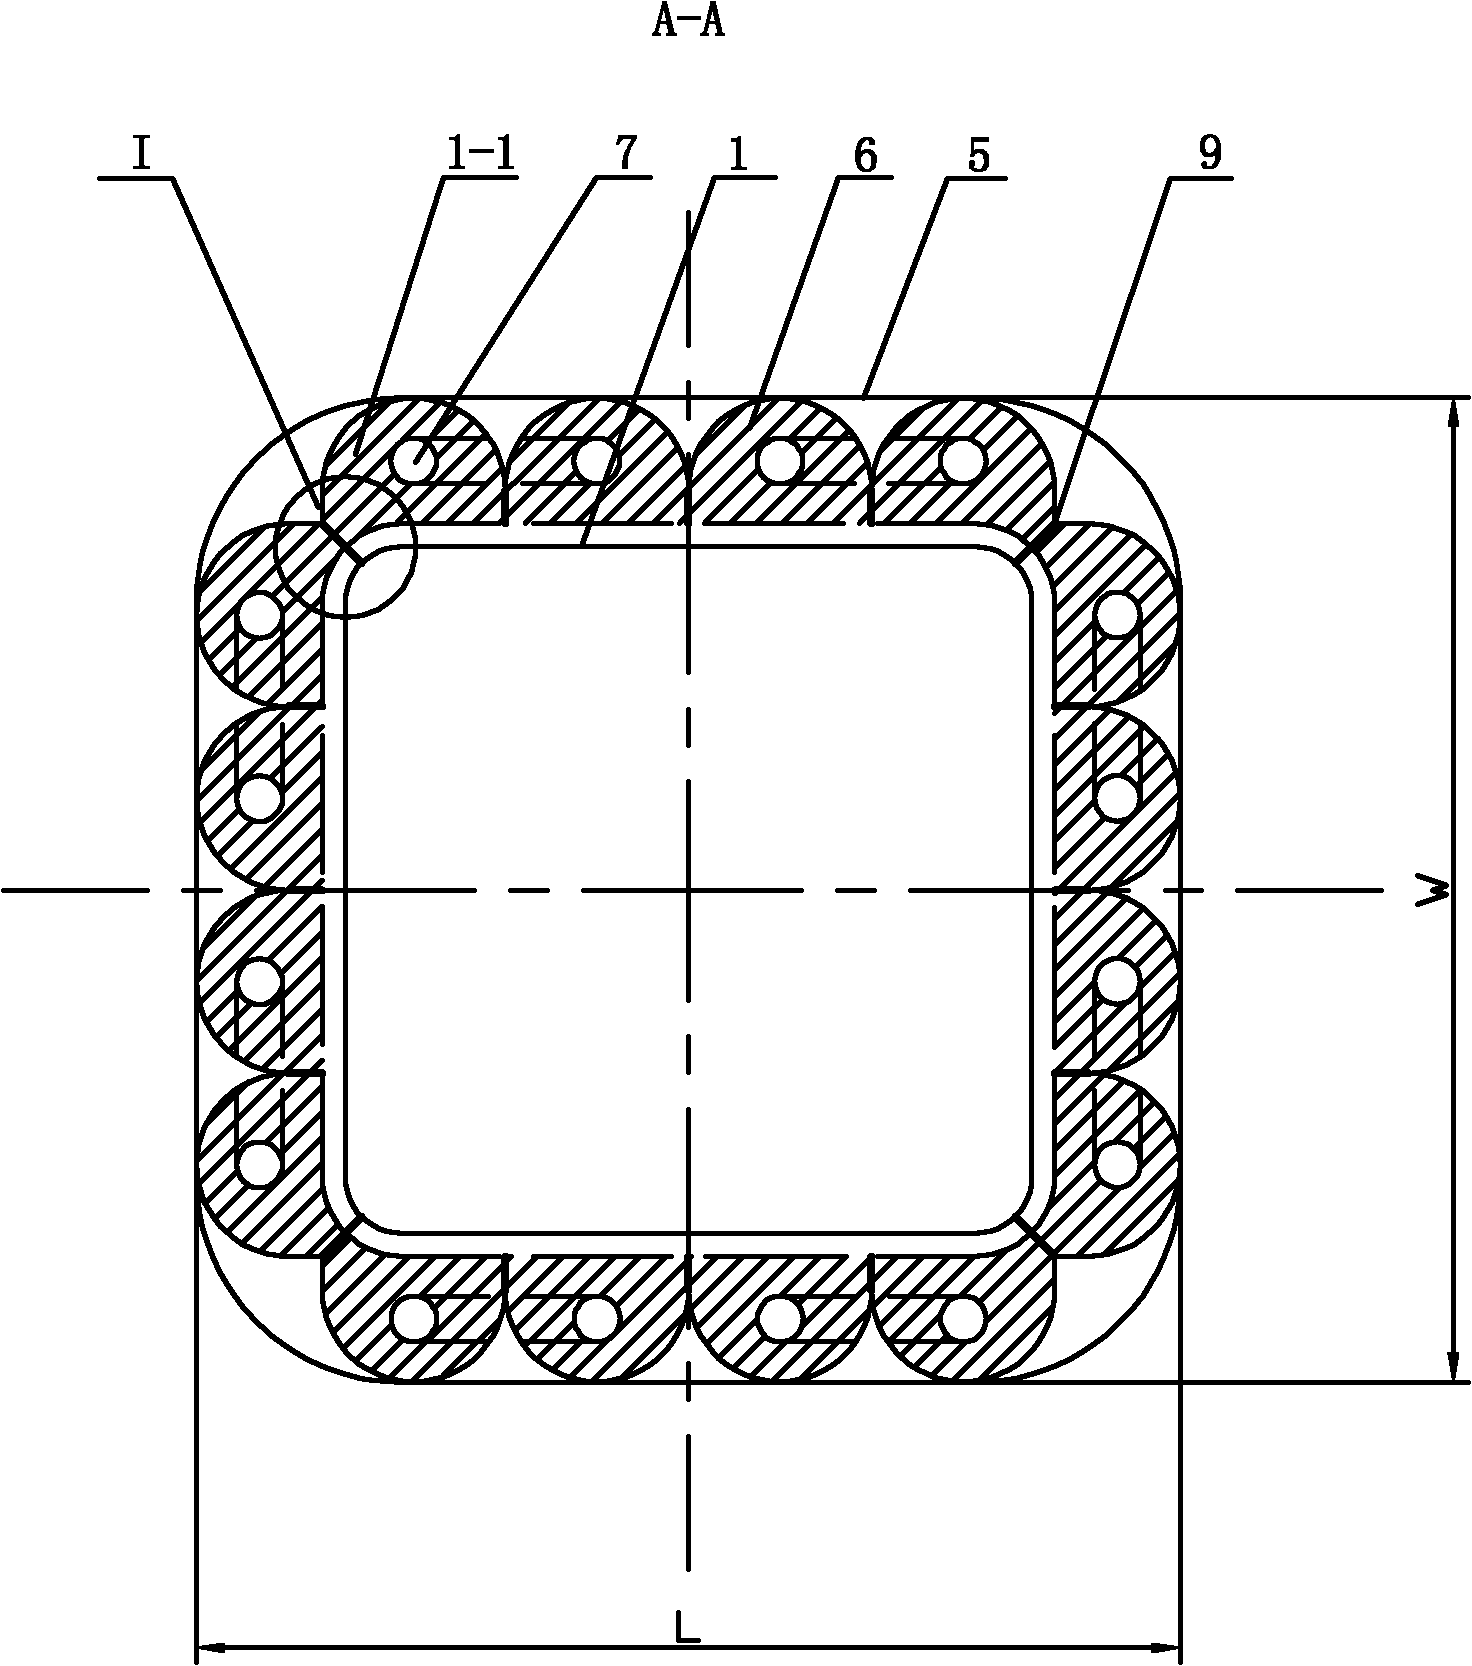 Square electromagnetic cold crucible for continuous melting and organizational control of polycrystalline silicon